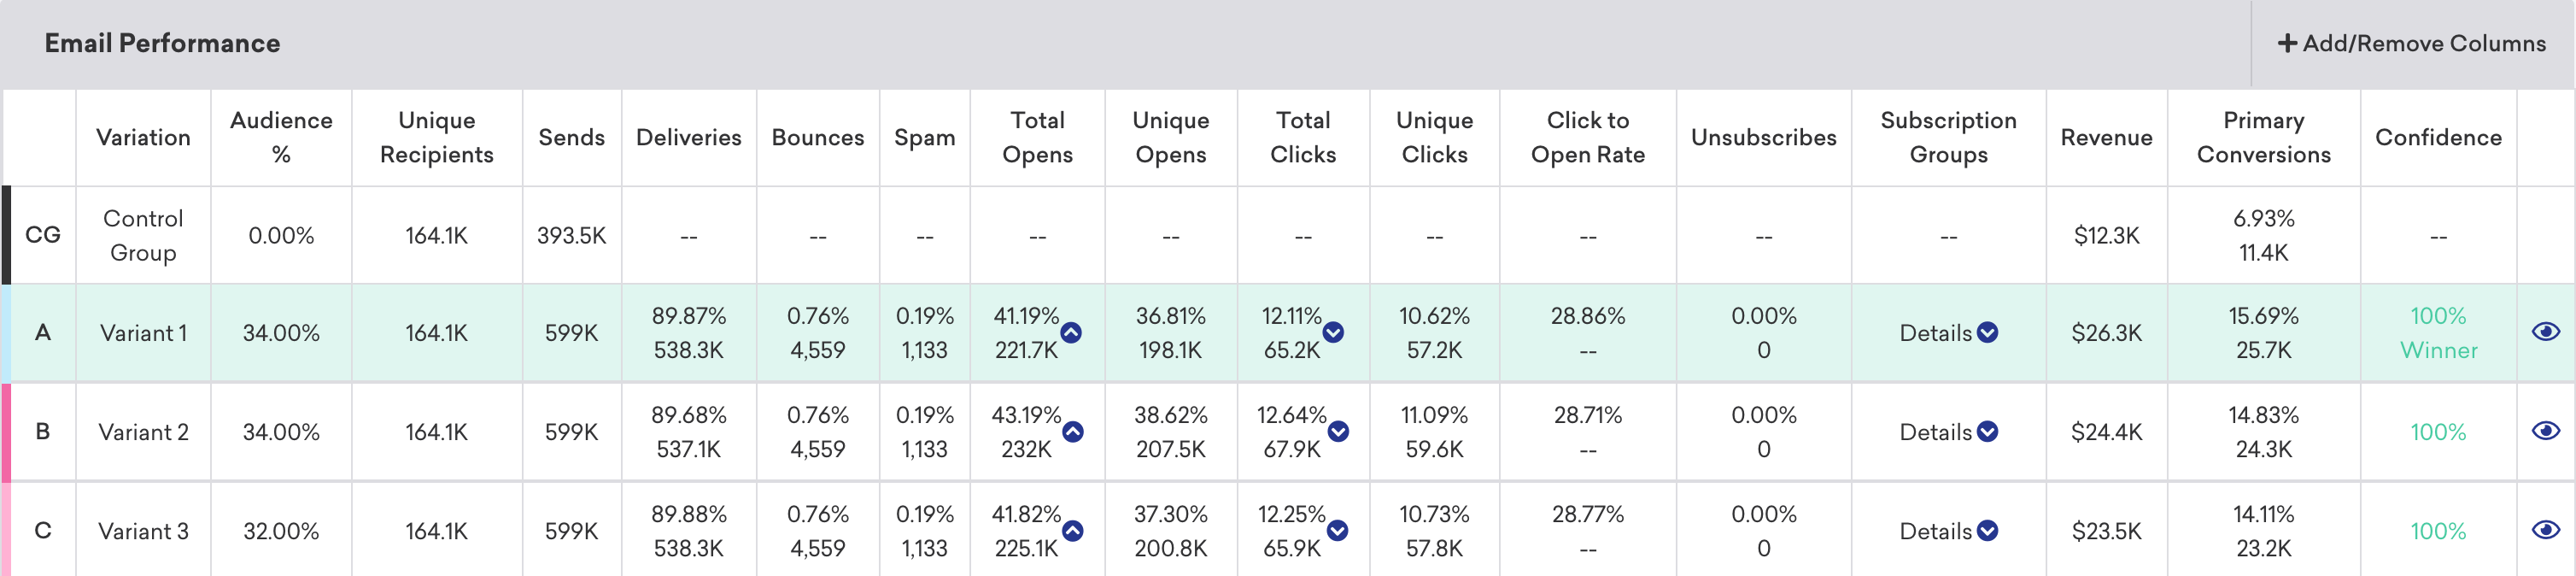 Email message performance analytics